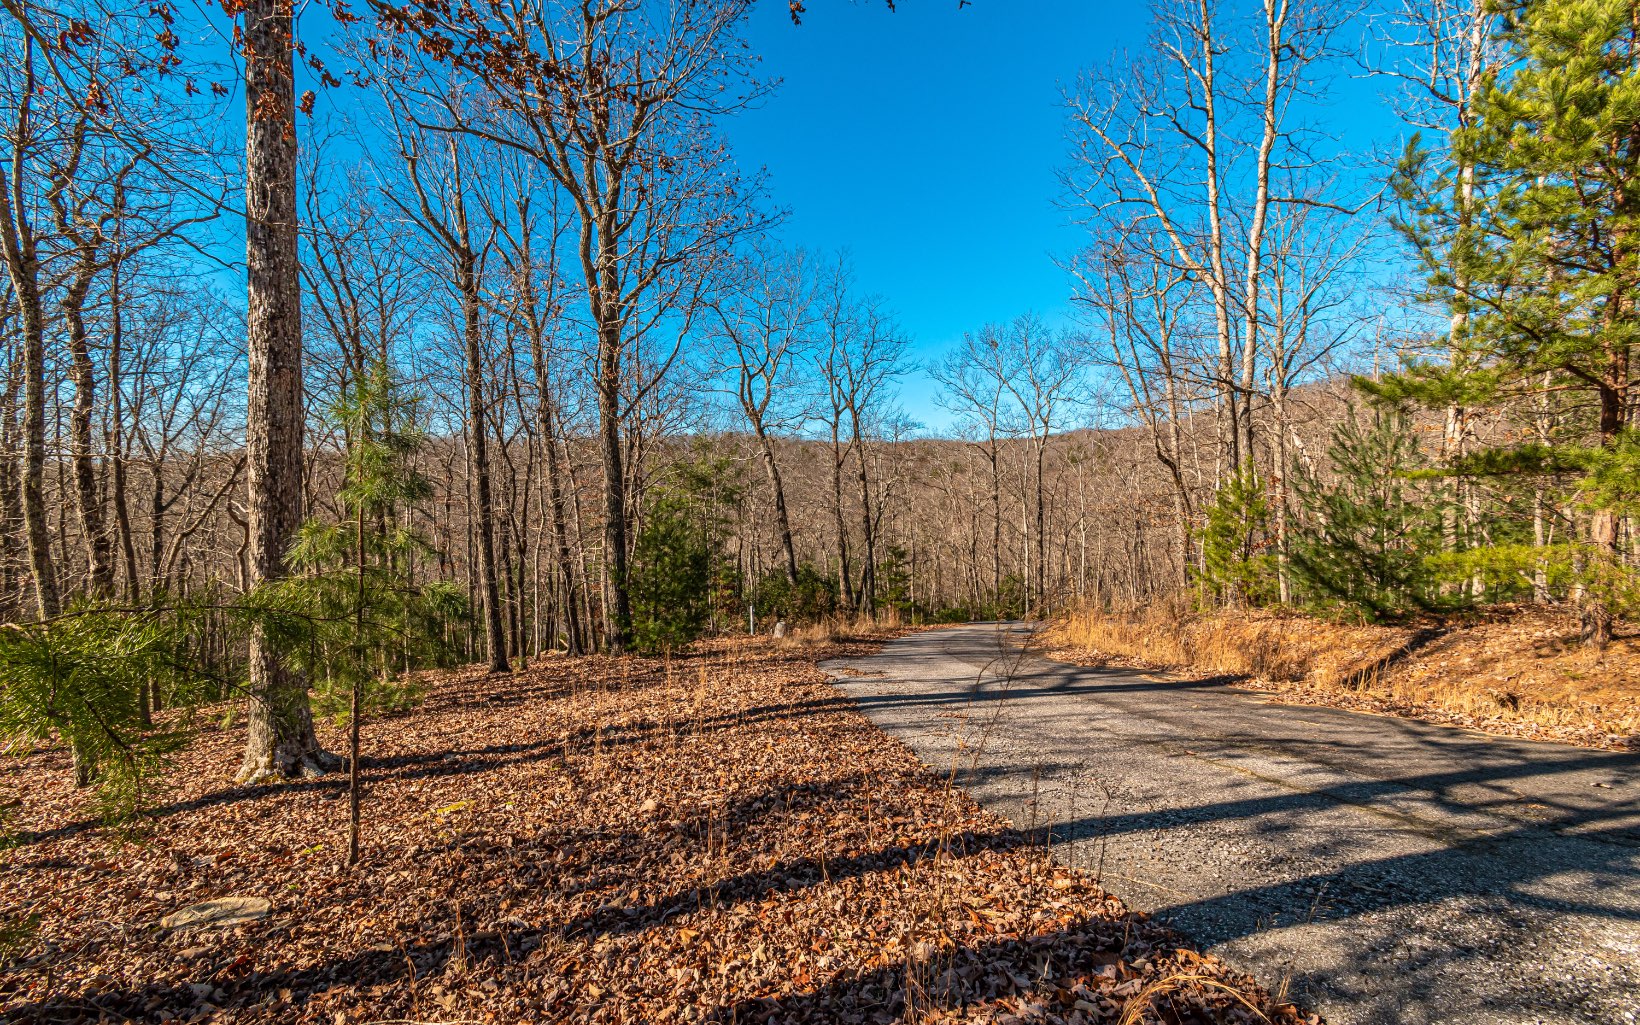 Beautiful gentle wooded 1.82AC lot in the quiet community of Hunters Ridge, located between Blue Ridge and Blairsville GA, just minutes from Downtown Blue Ridge, Lake Blue Ridge, the Toccoa River, shopping, restaurants, hiking trails & more! Get out and hike this gently sloping lot with potentially multiple building sites to choose from, and build the mountain home of your dreams where you can peacefully watch deer and turkey in your own backyard!